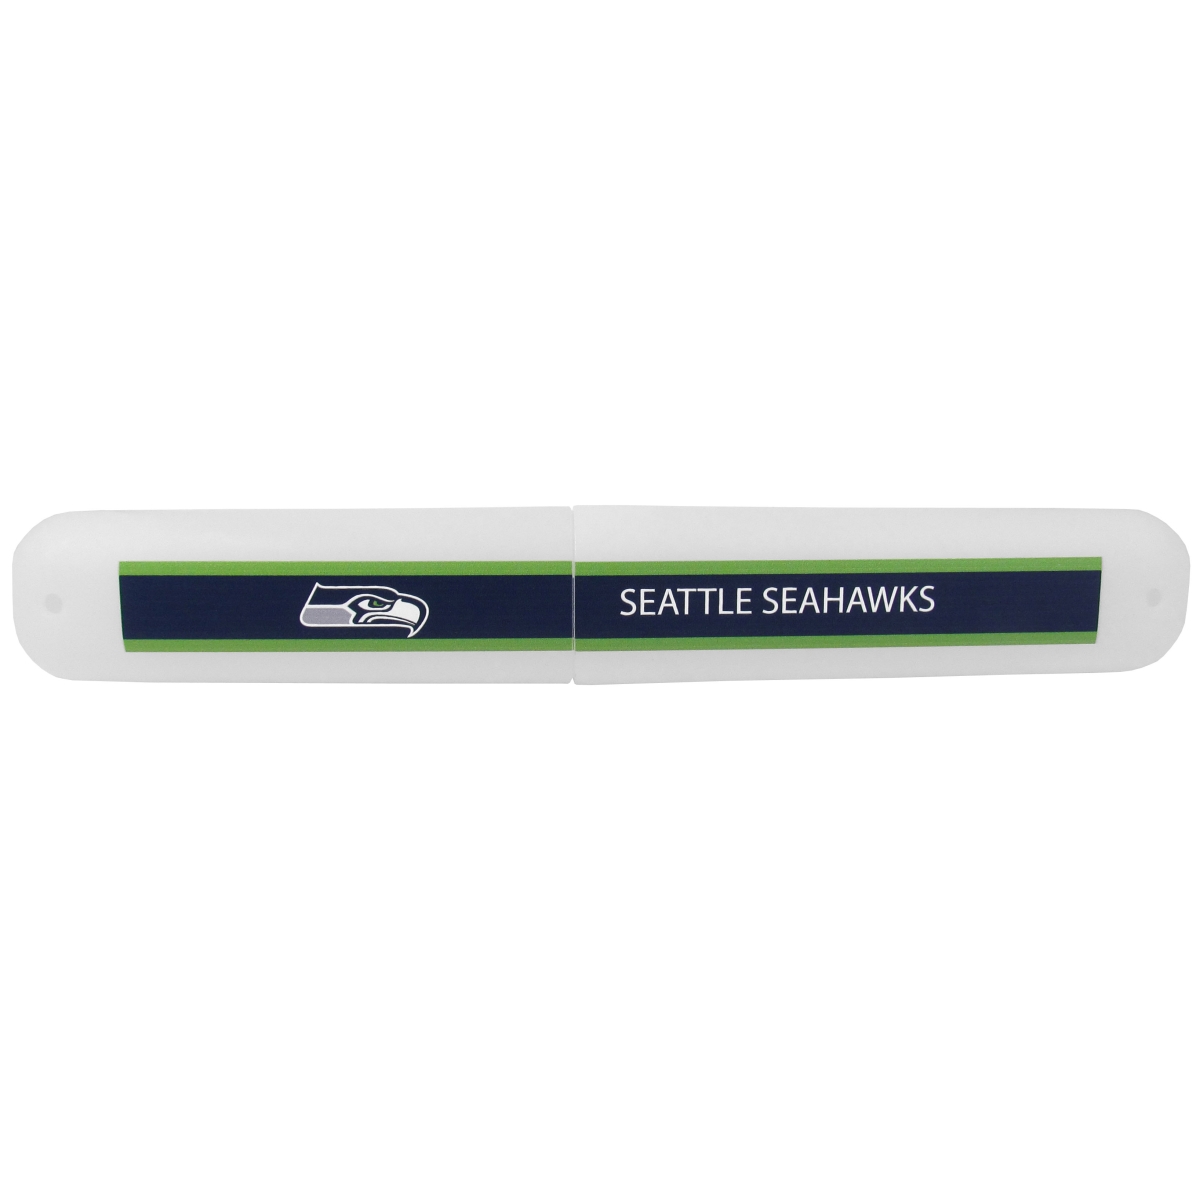 Picture of Siskiyou FTBC155 Unisex NFL Seattle Seahawks Travel Toothbrush Case - One Size